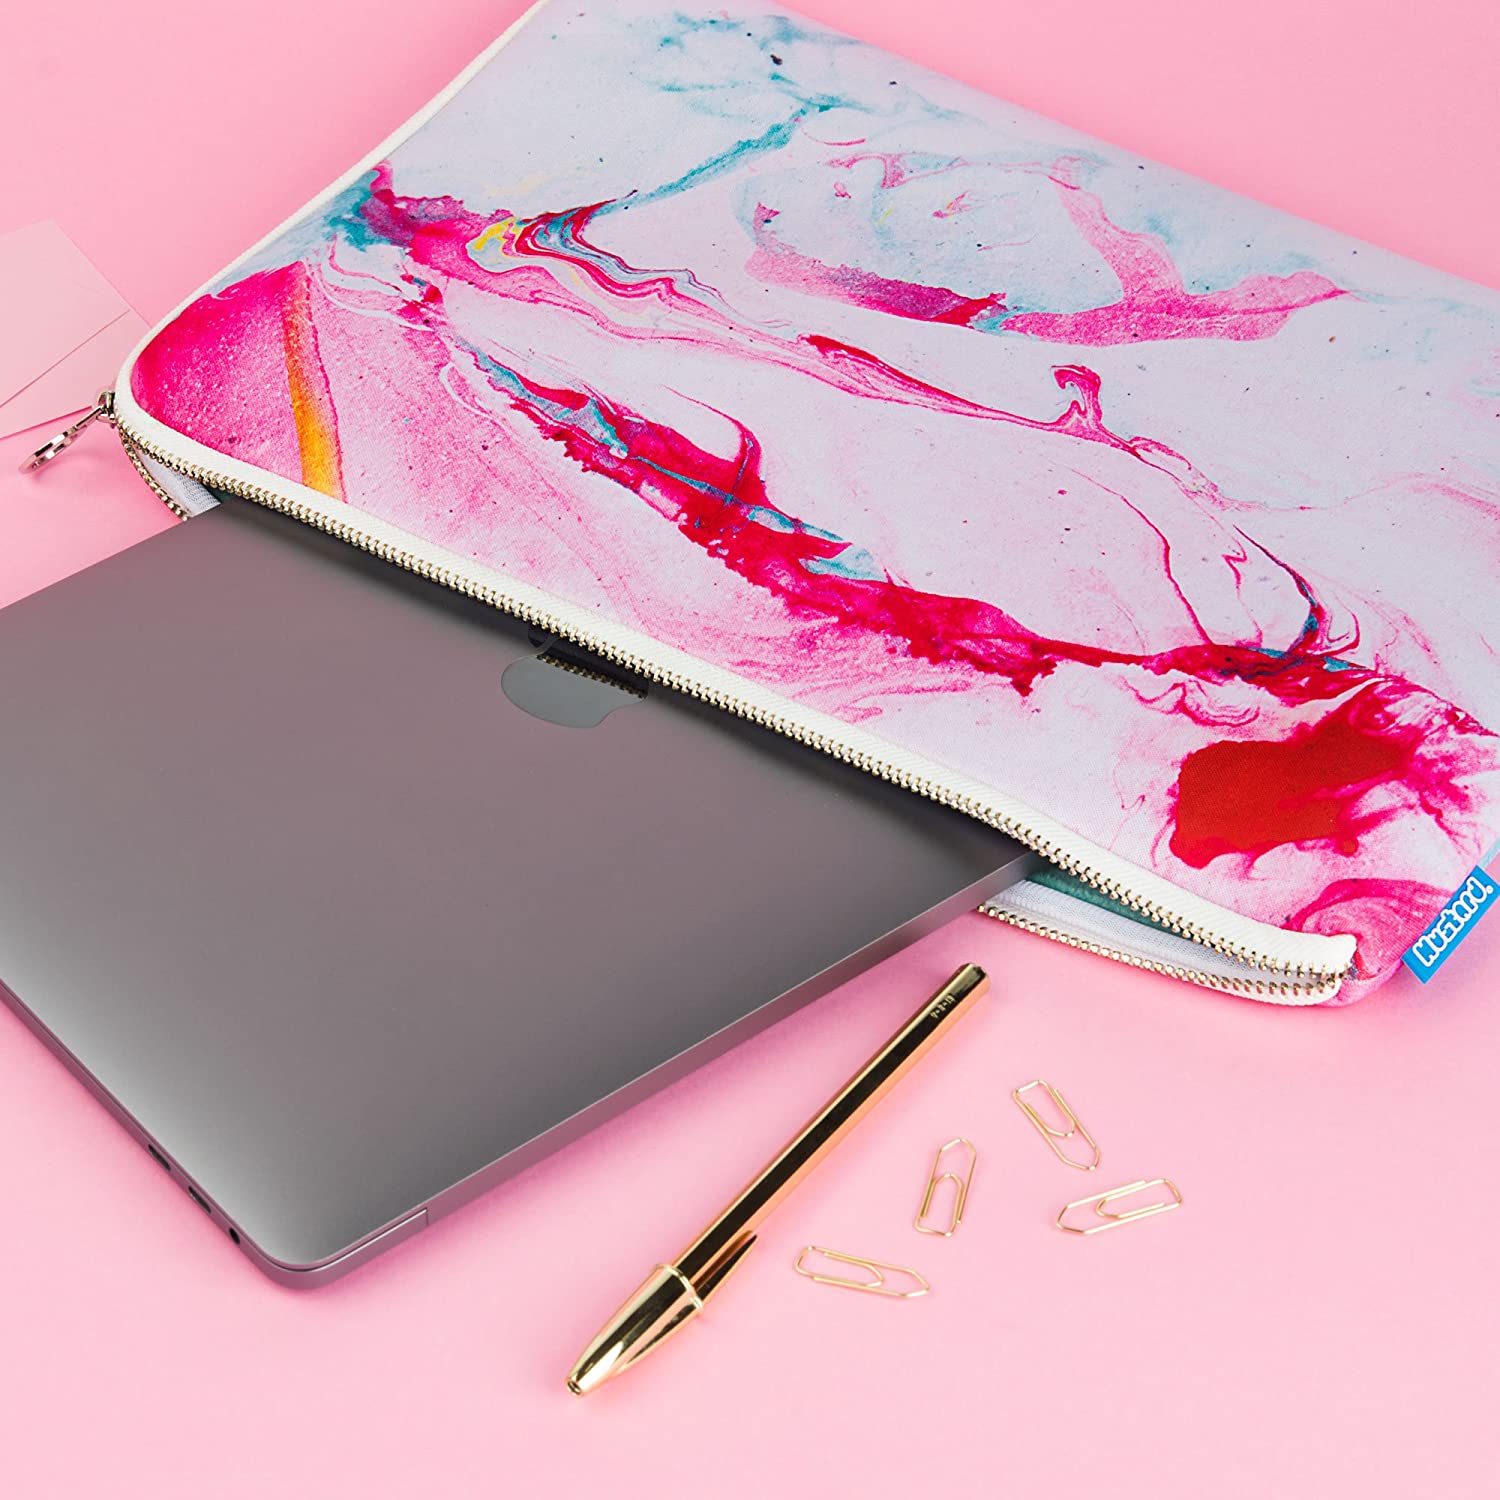 Marble Laptop Sleeve Case | Compatible With 13" and Some 14" Laptops